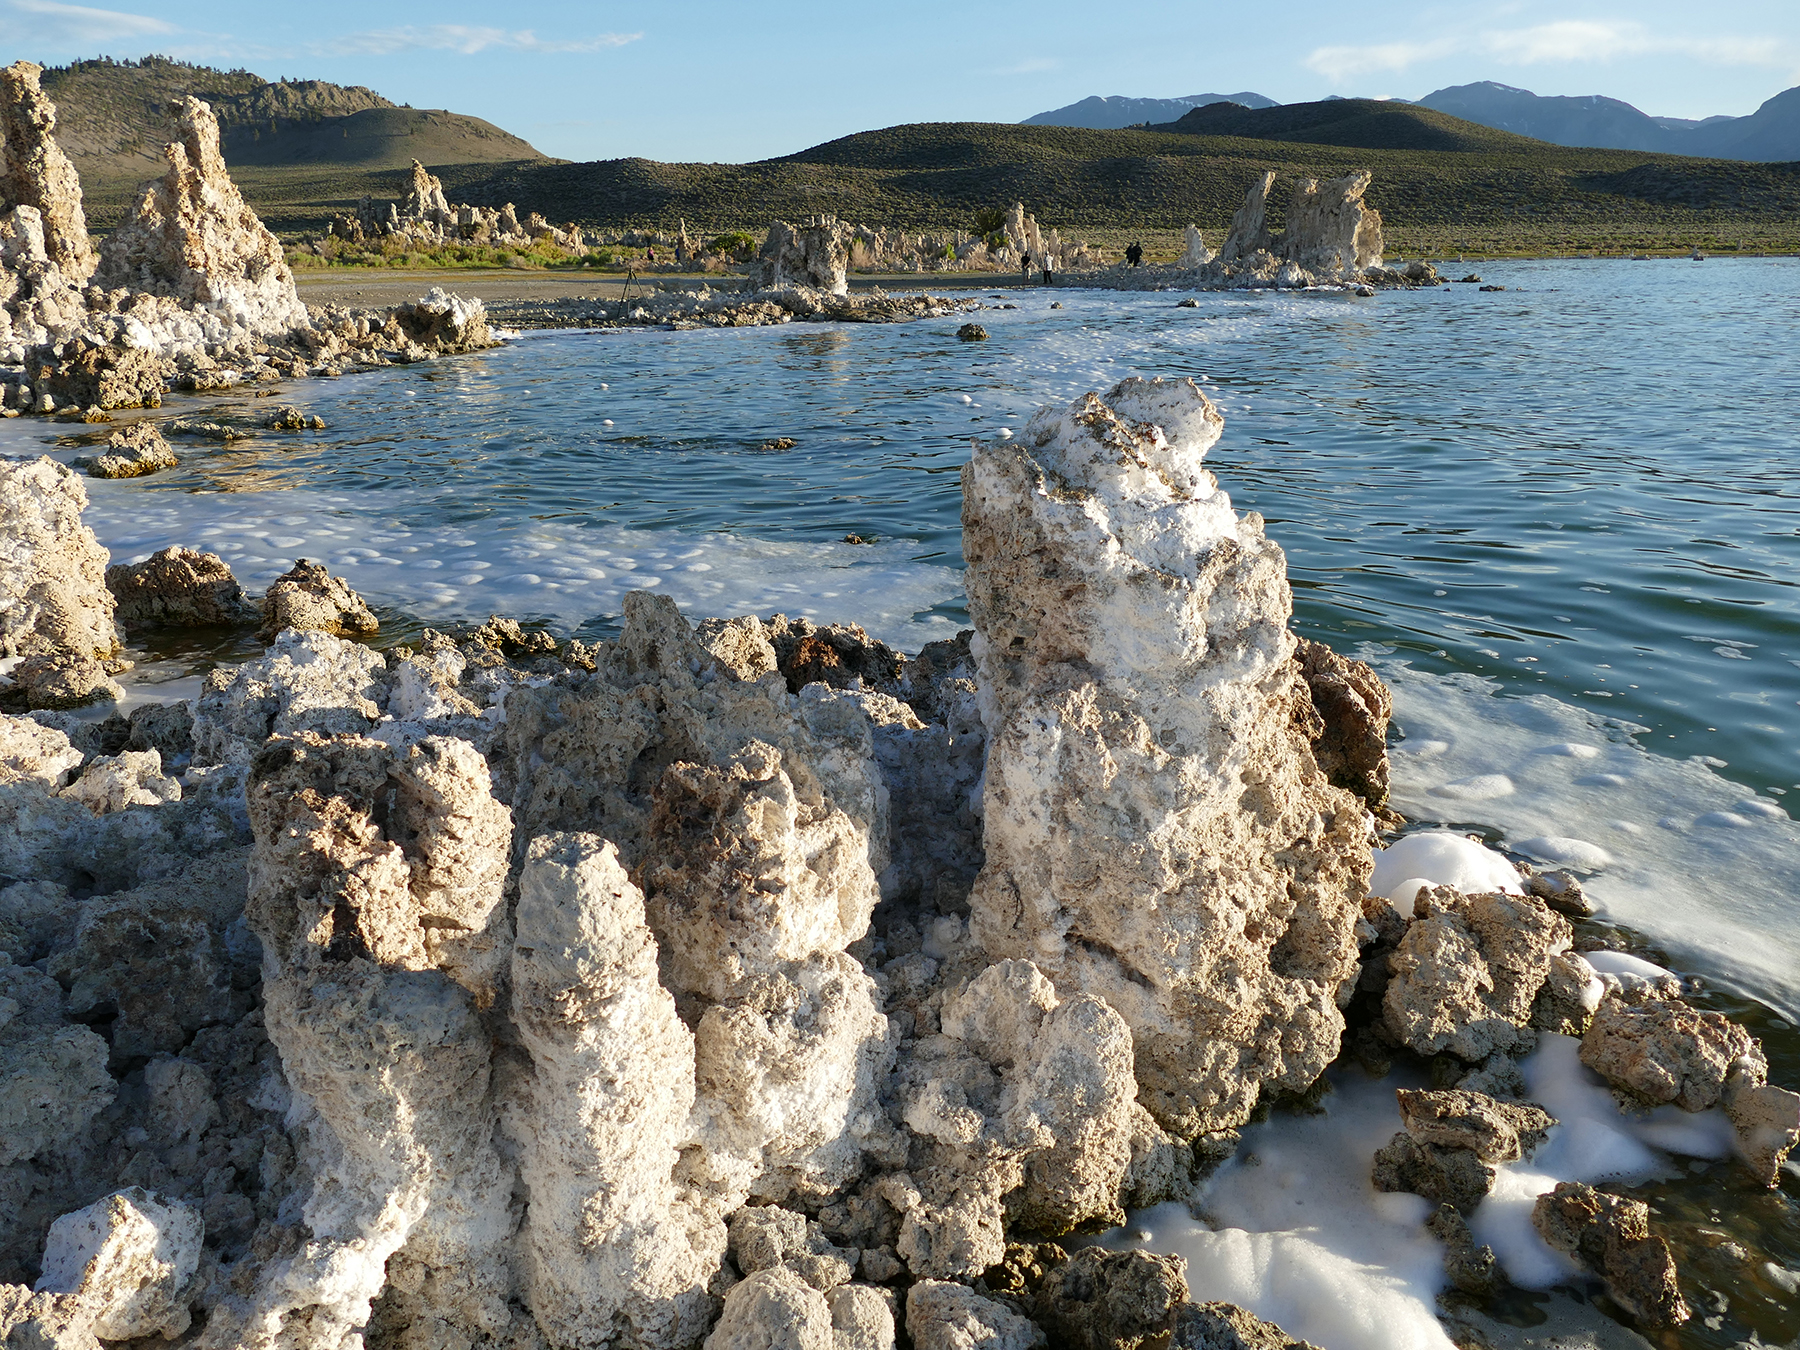 Rock formations, known as Tufa towers, at Mono Lake. (Photograph courtesy of the Mono Lake Committee)